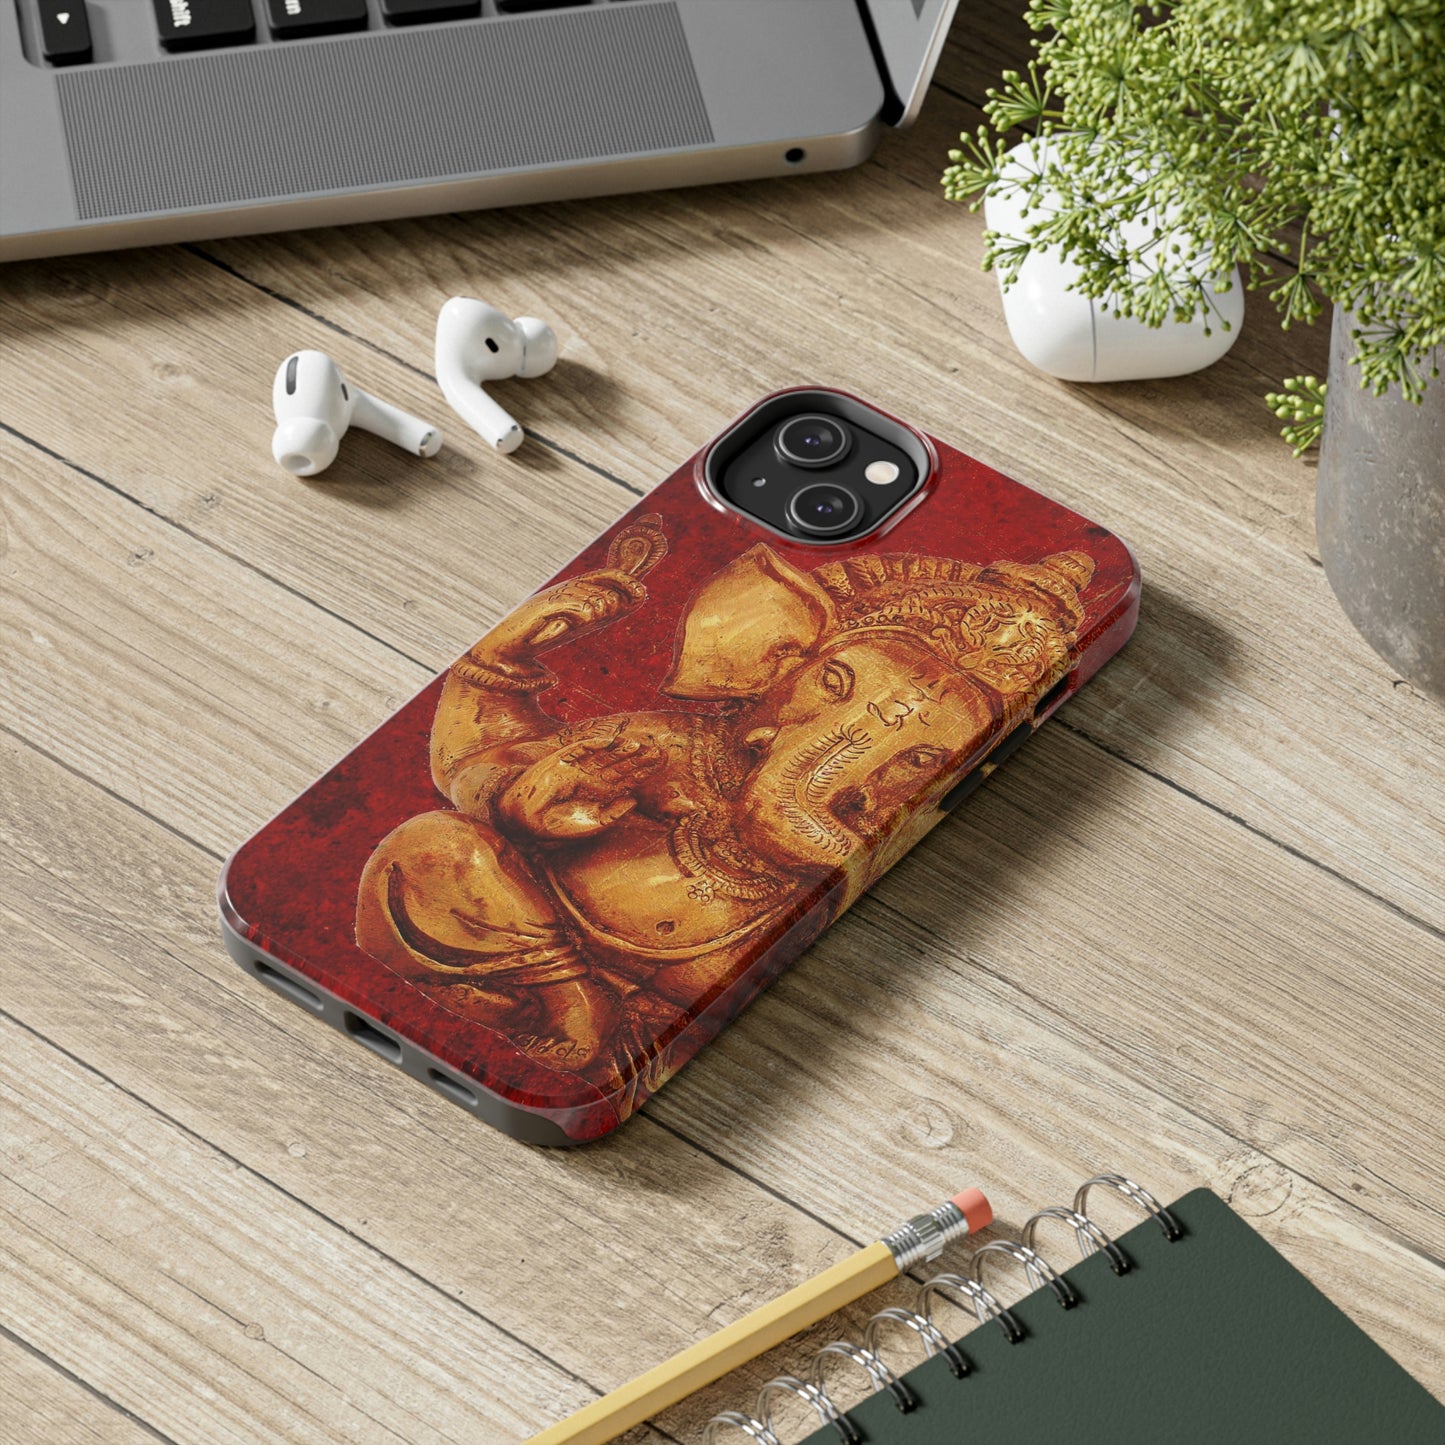 Ganesh Themed Tough Case for iPhone 14 - Gold Ganesha on Lava Red Print Phone Case for iPhone 14